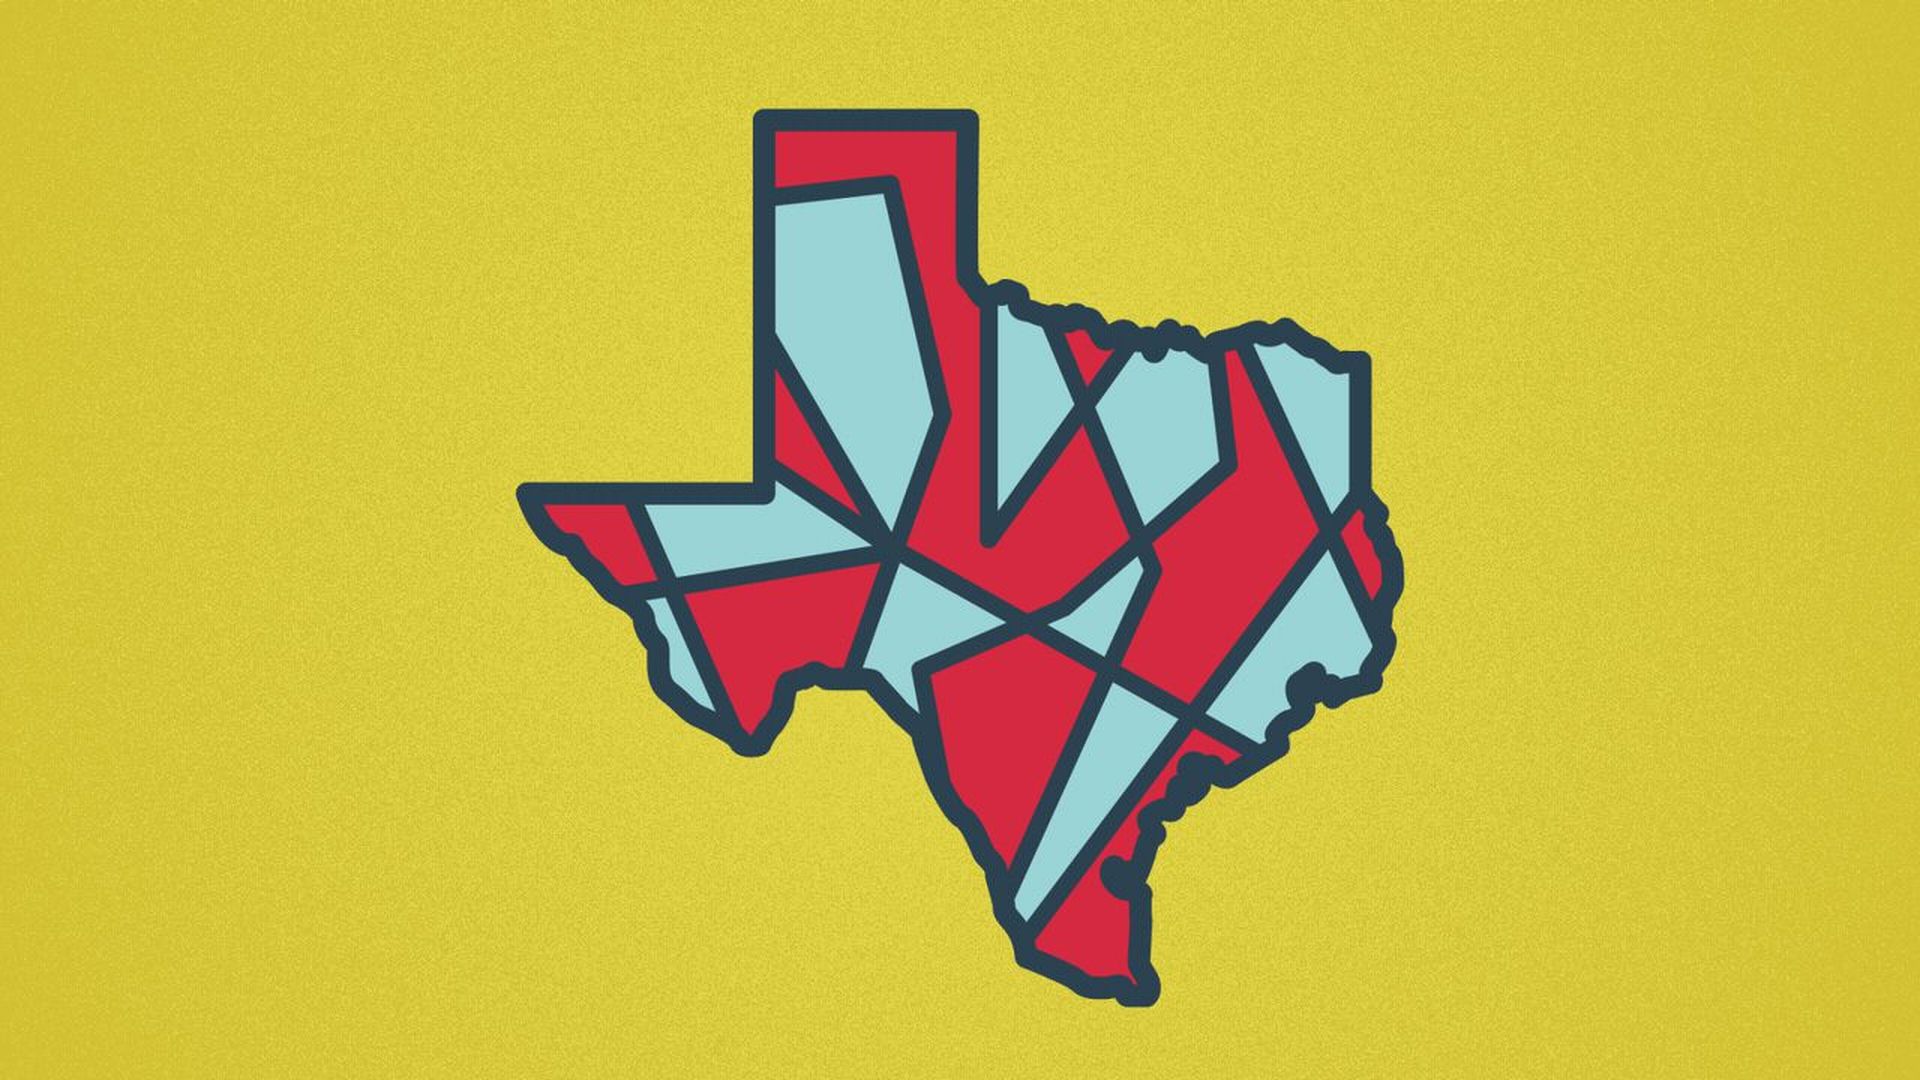 Illustration of the state of Texas with red and blue districts inside it. 